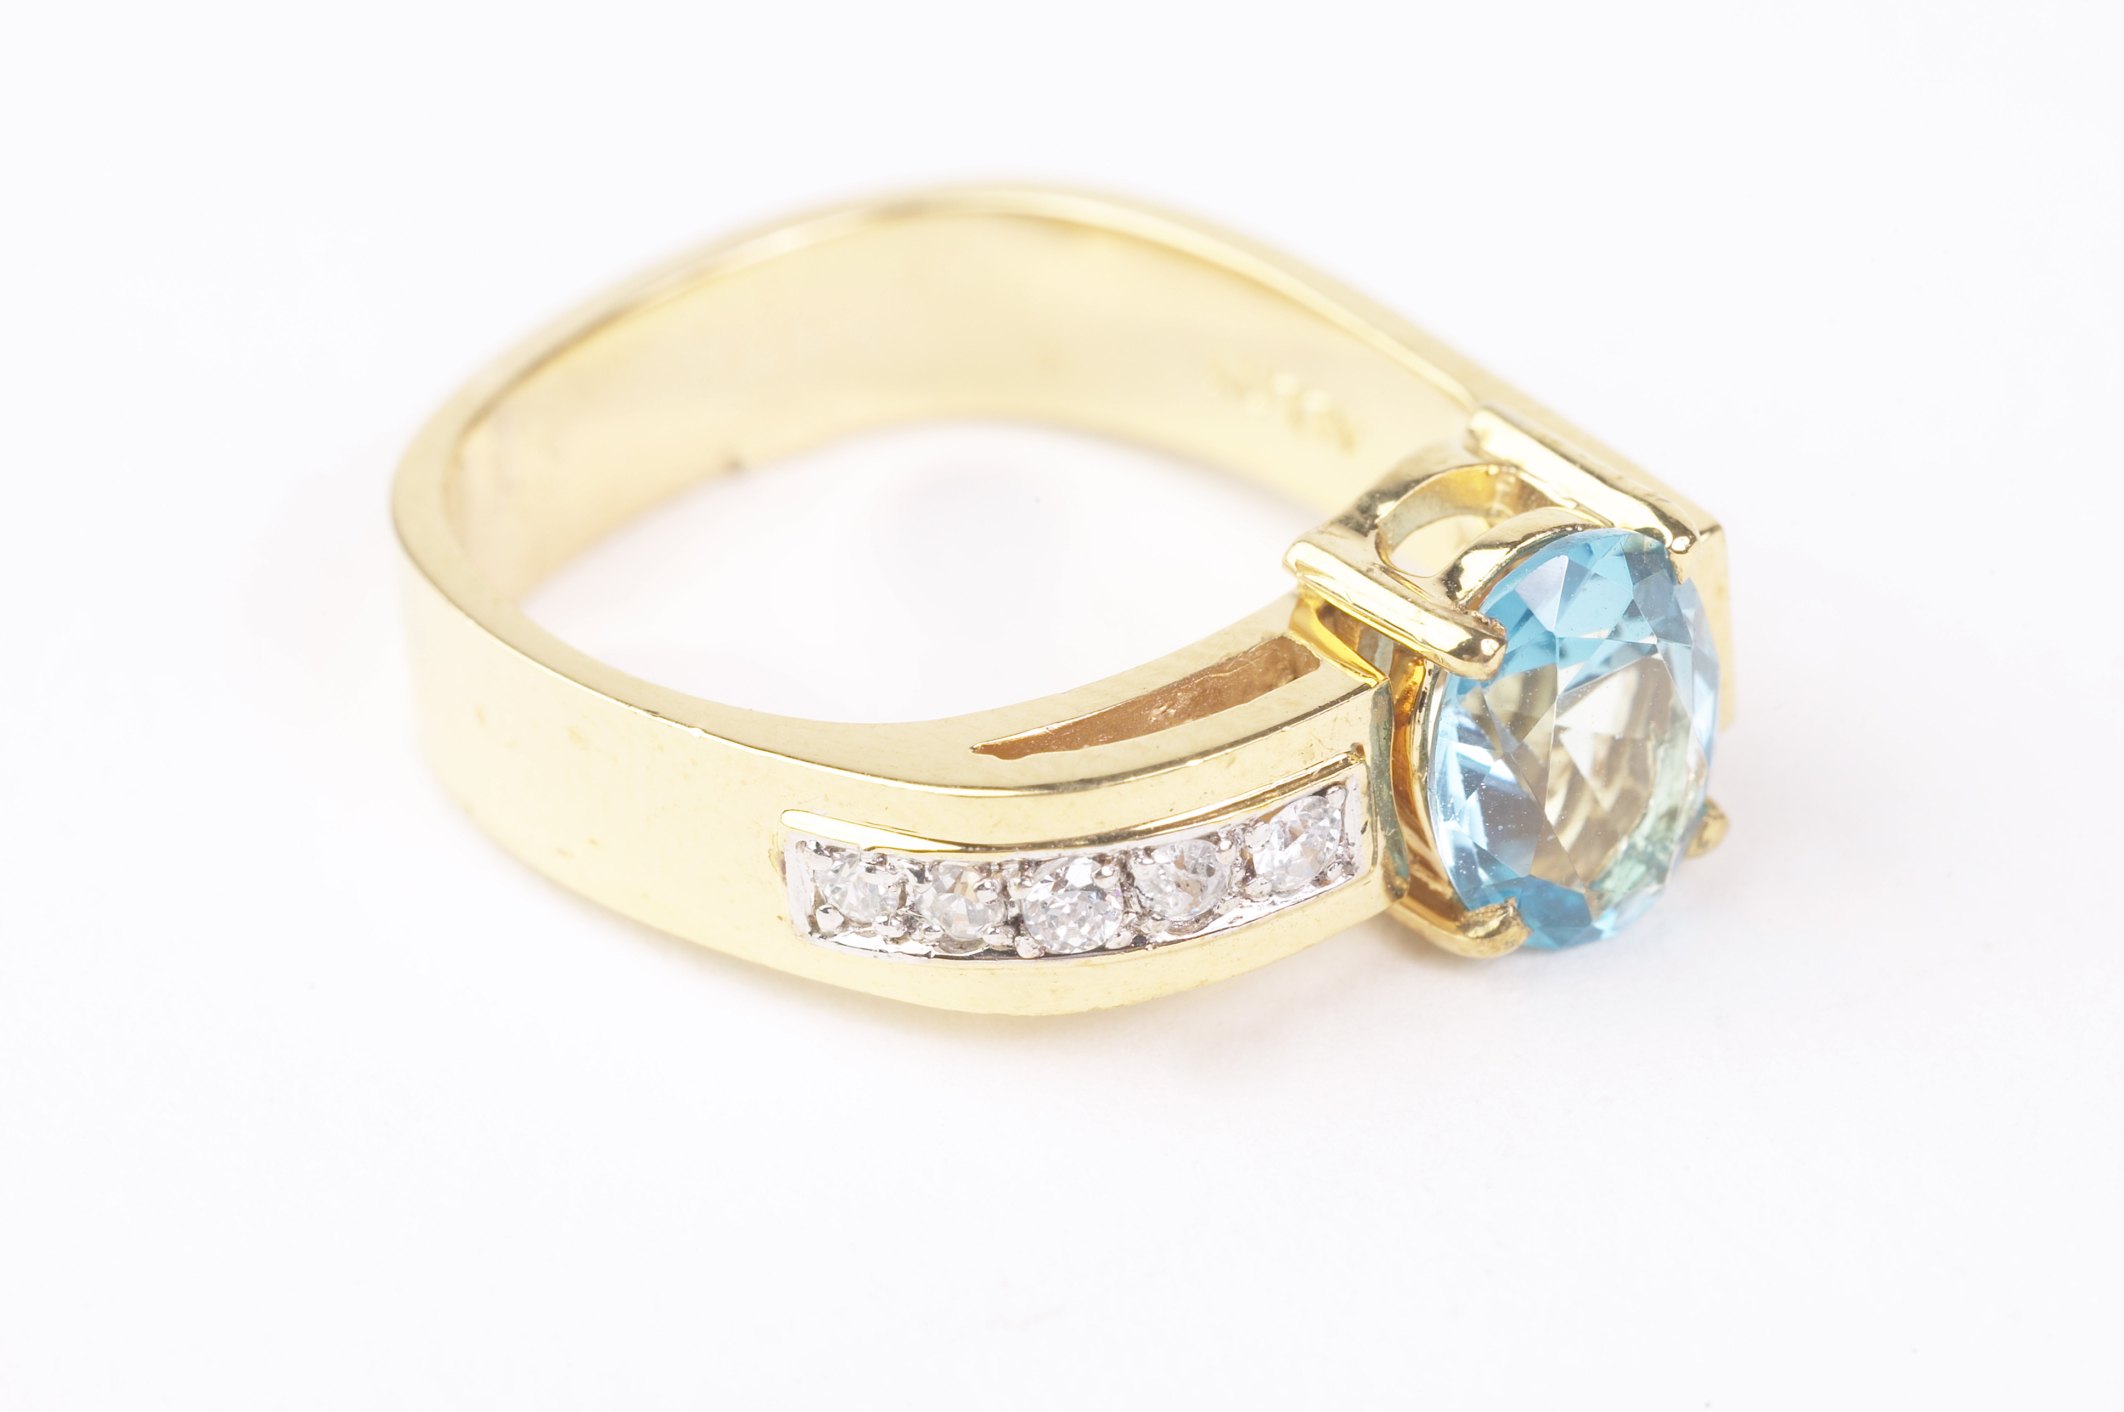 How to Add Diamonds to a Ring | eHow